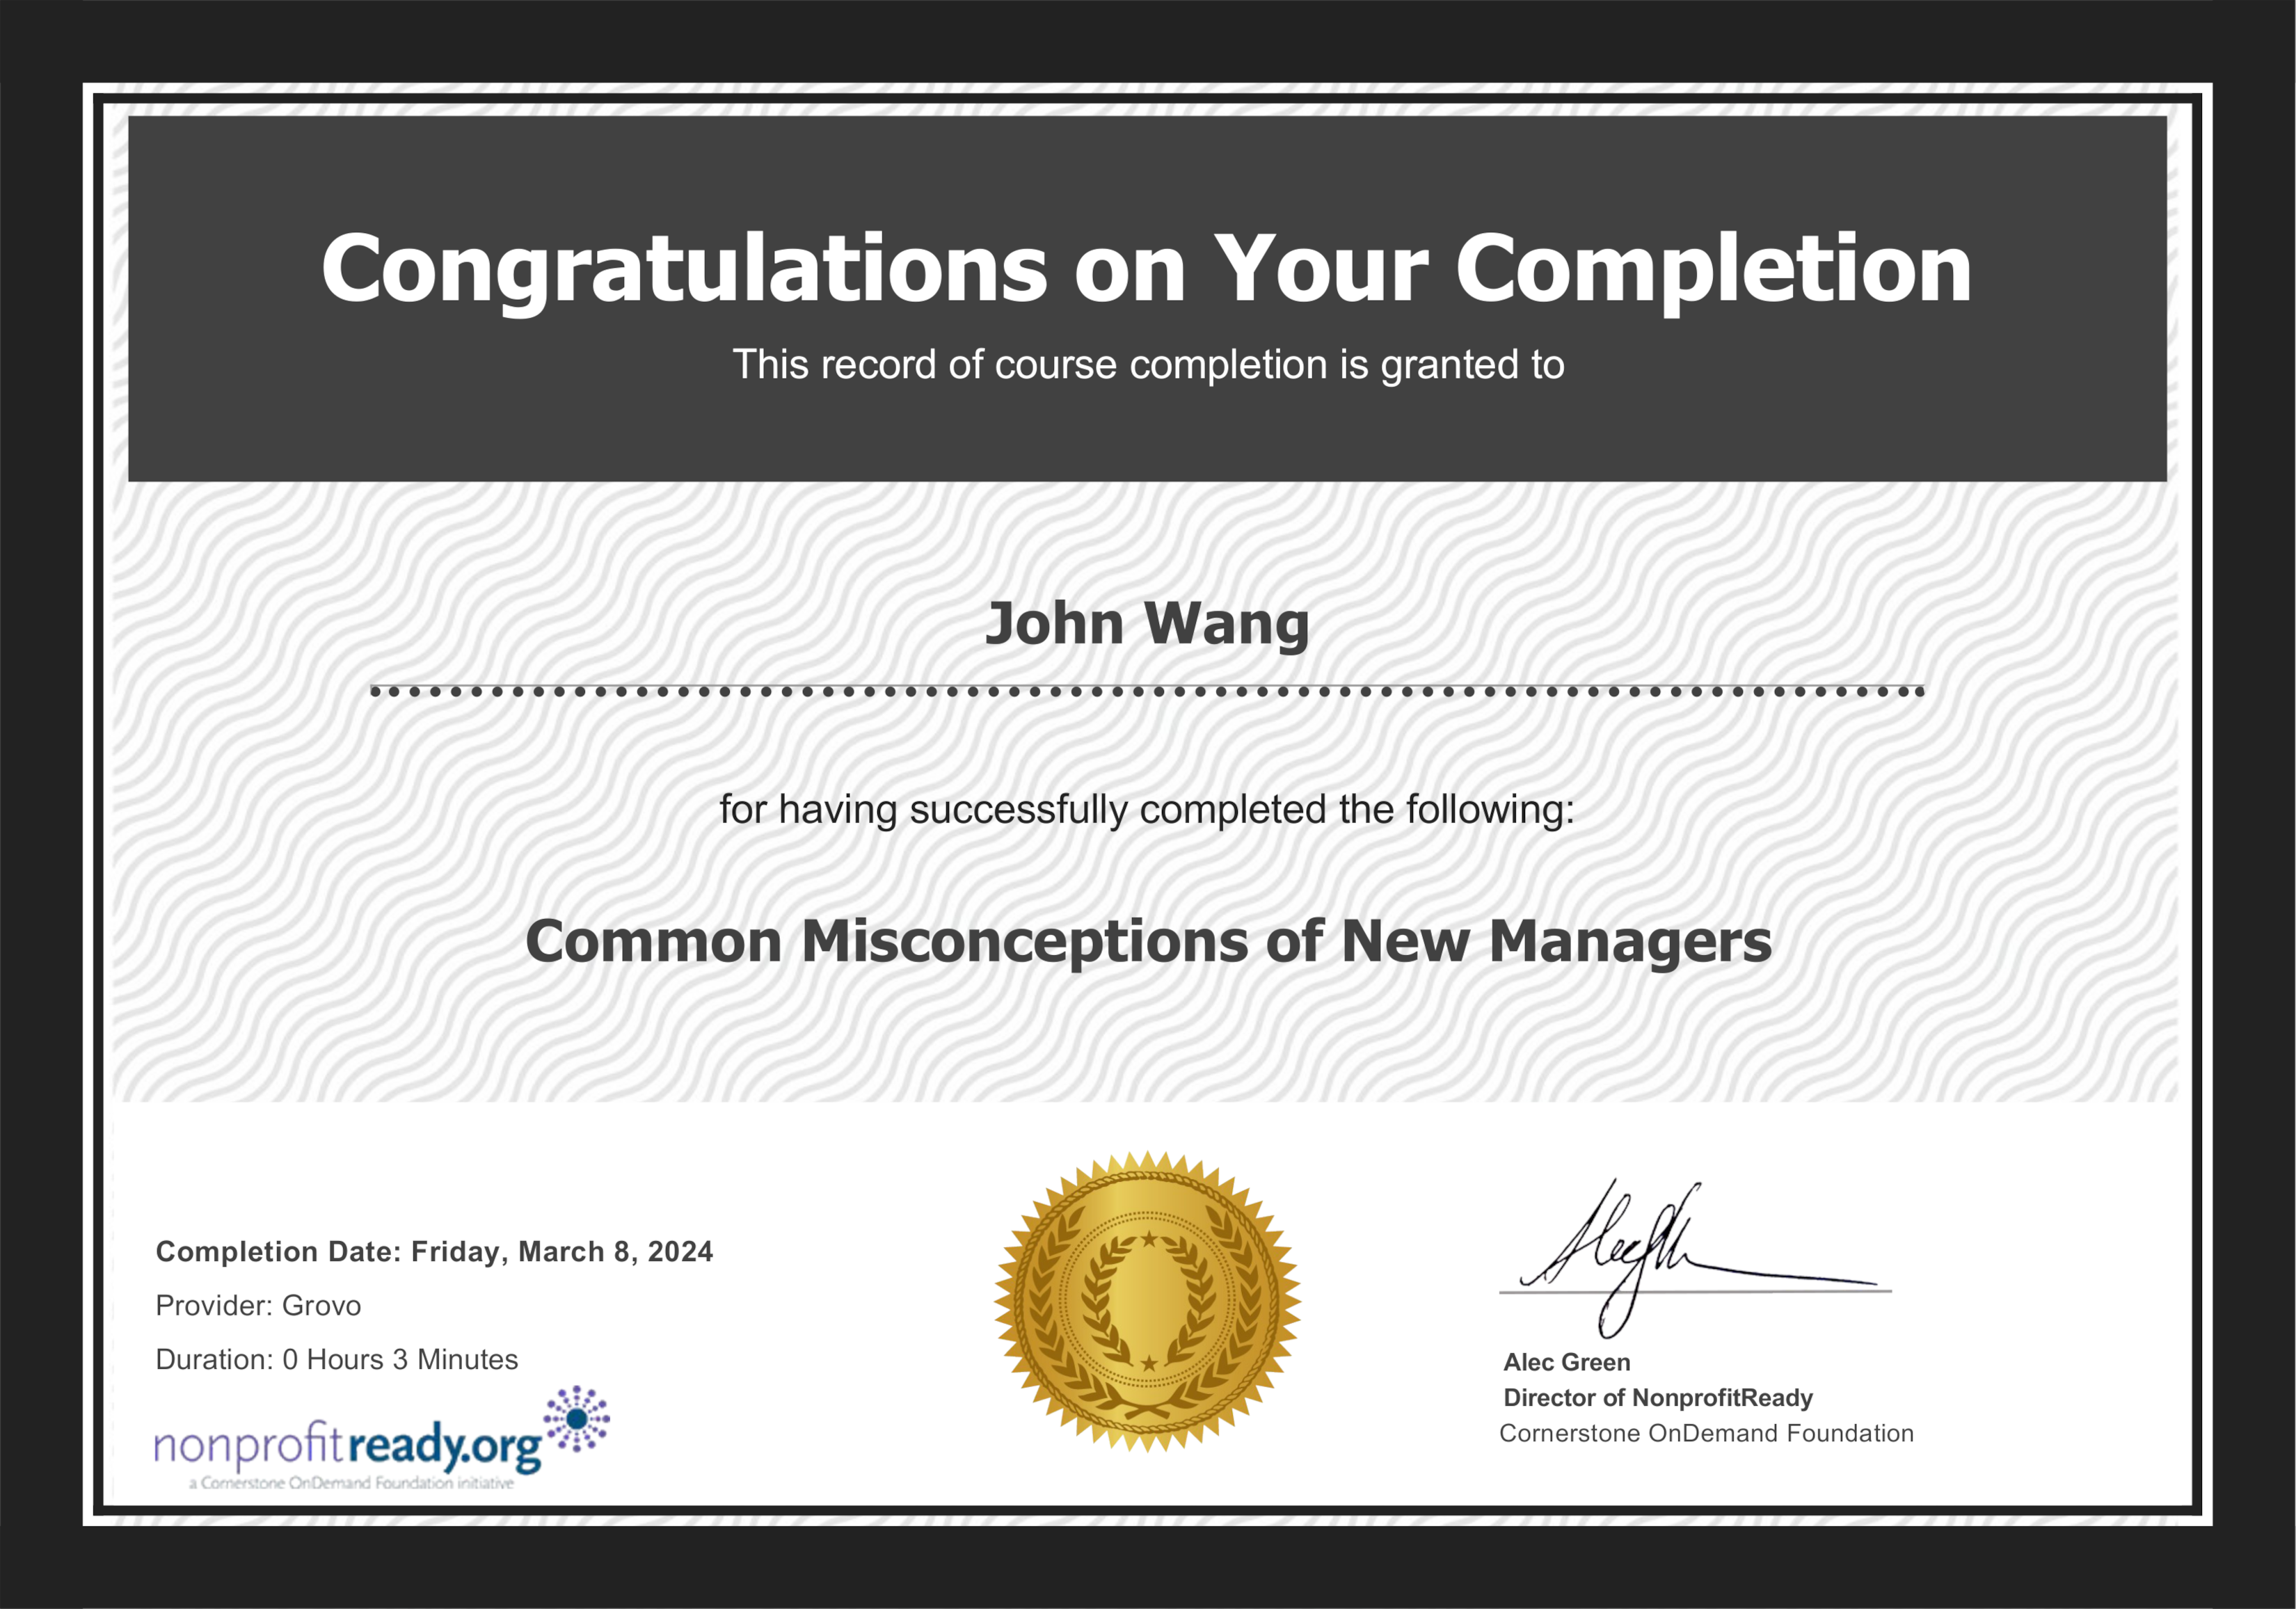 John's Common Misconceptions of New Managers from NonprofitReady by Grovo